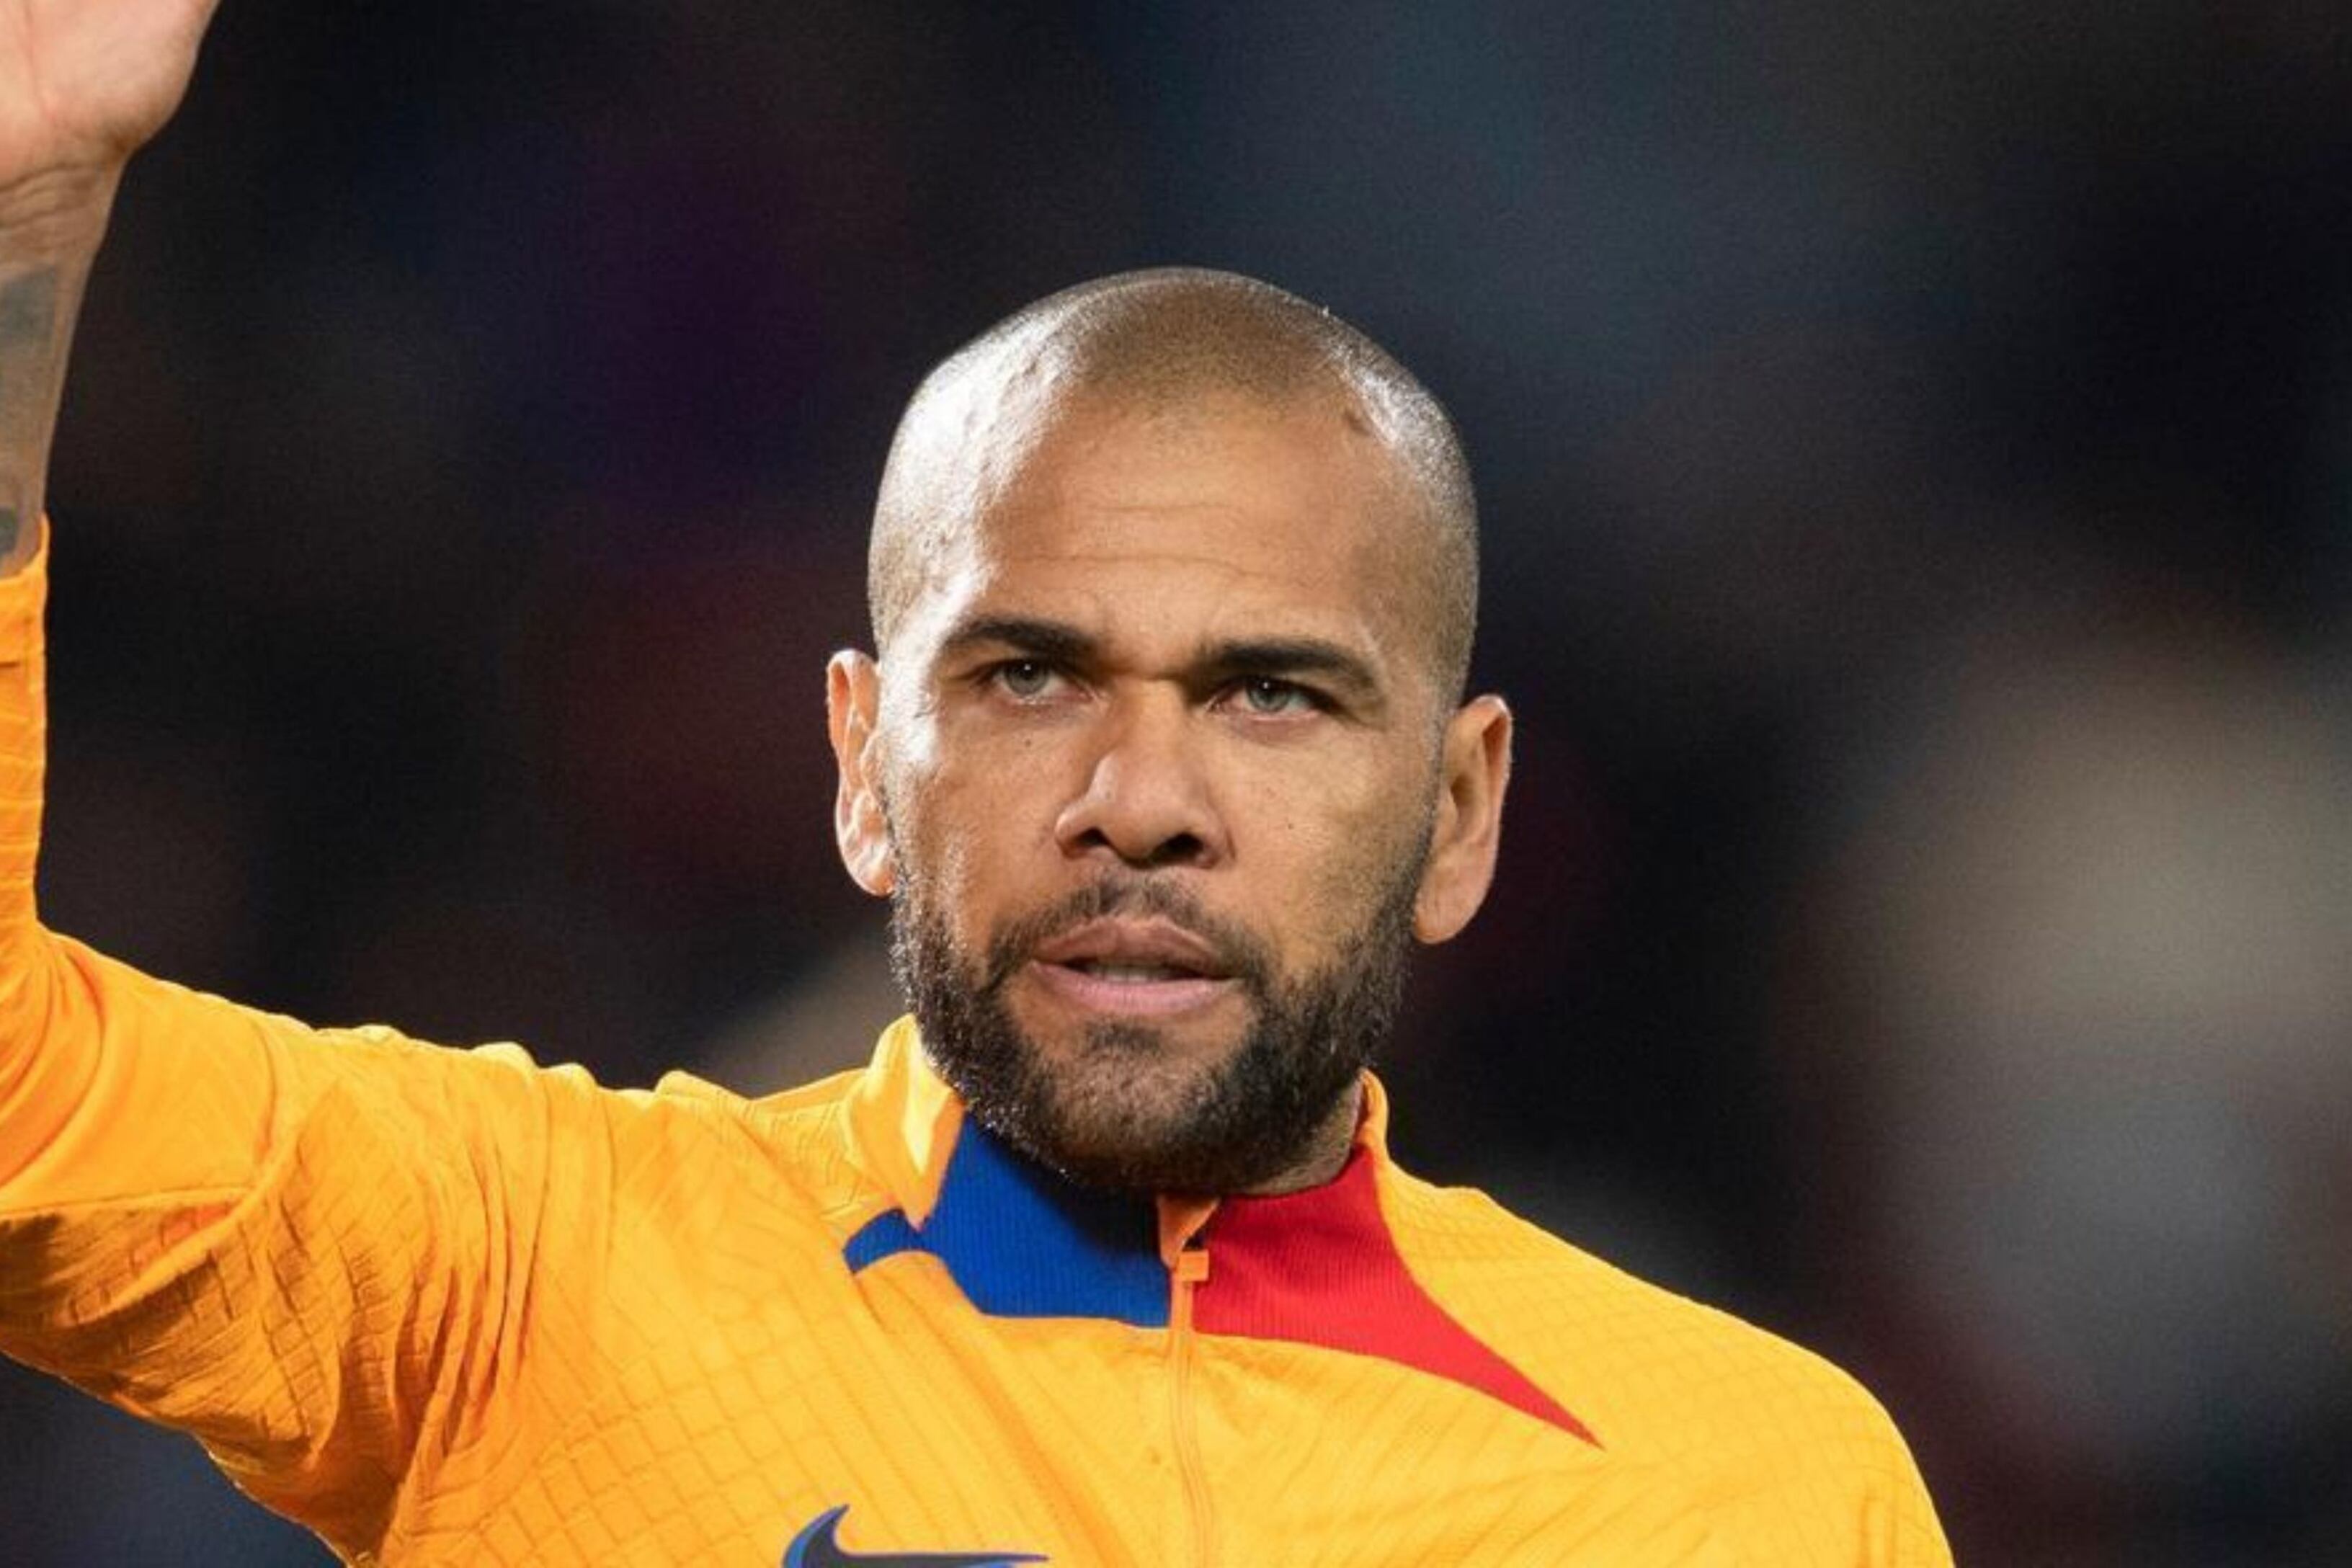 While Dani Alves faces justice, he receives the best news